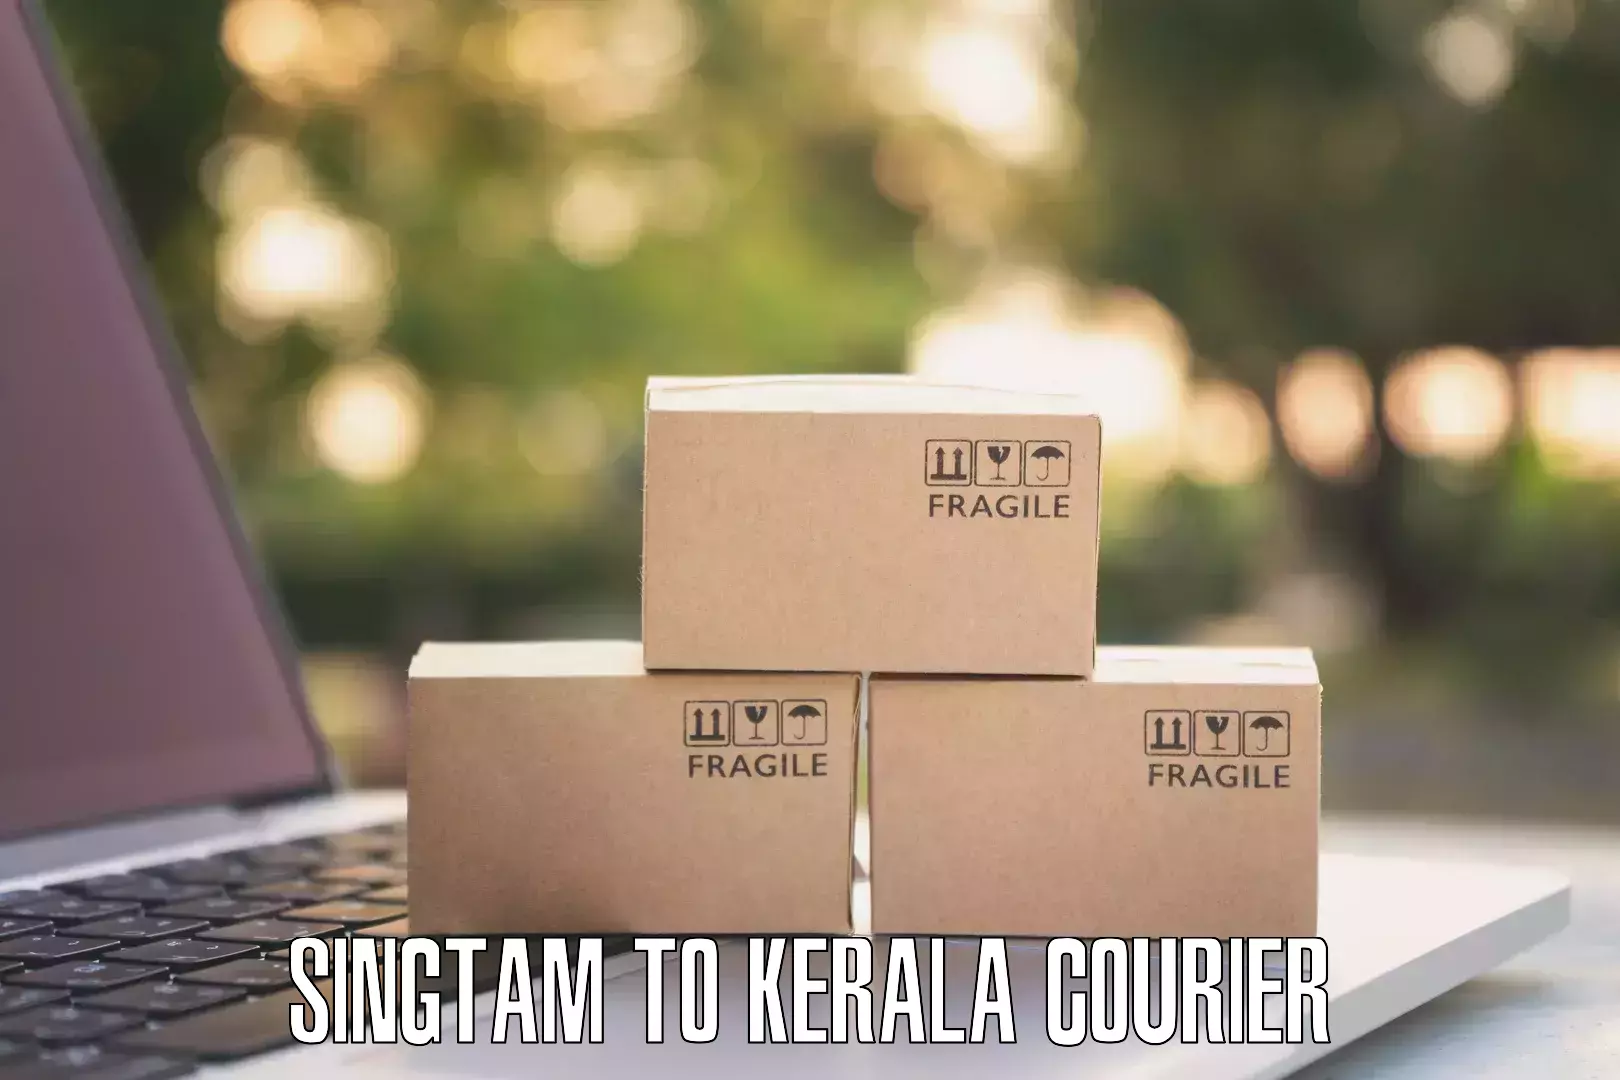 Efficient courier operations Singtam to Cochin